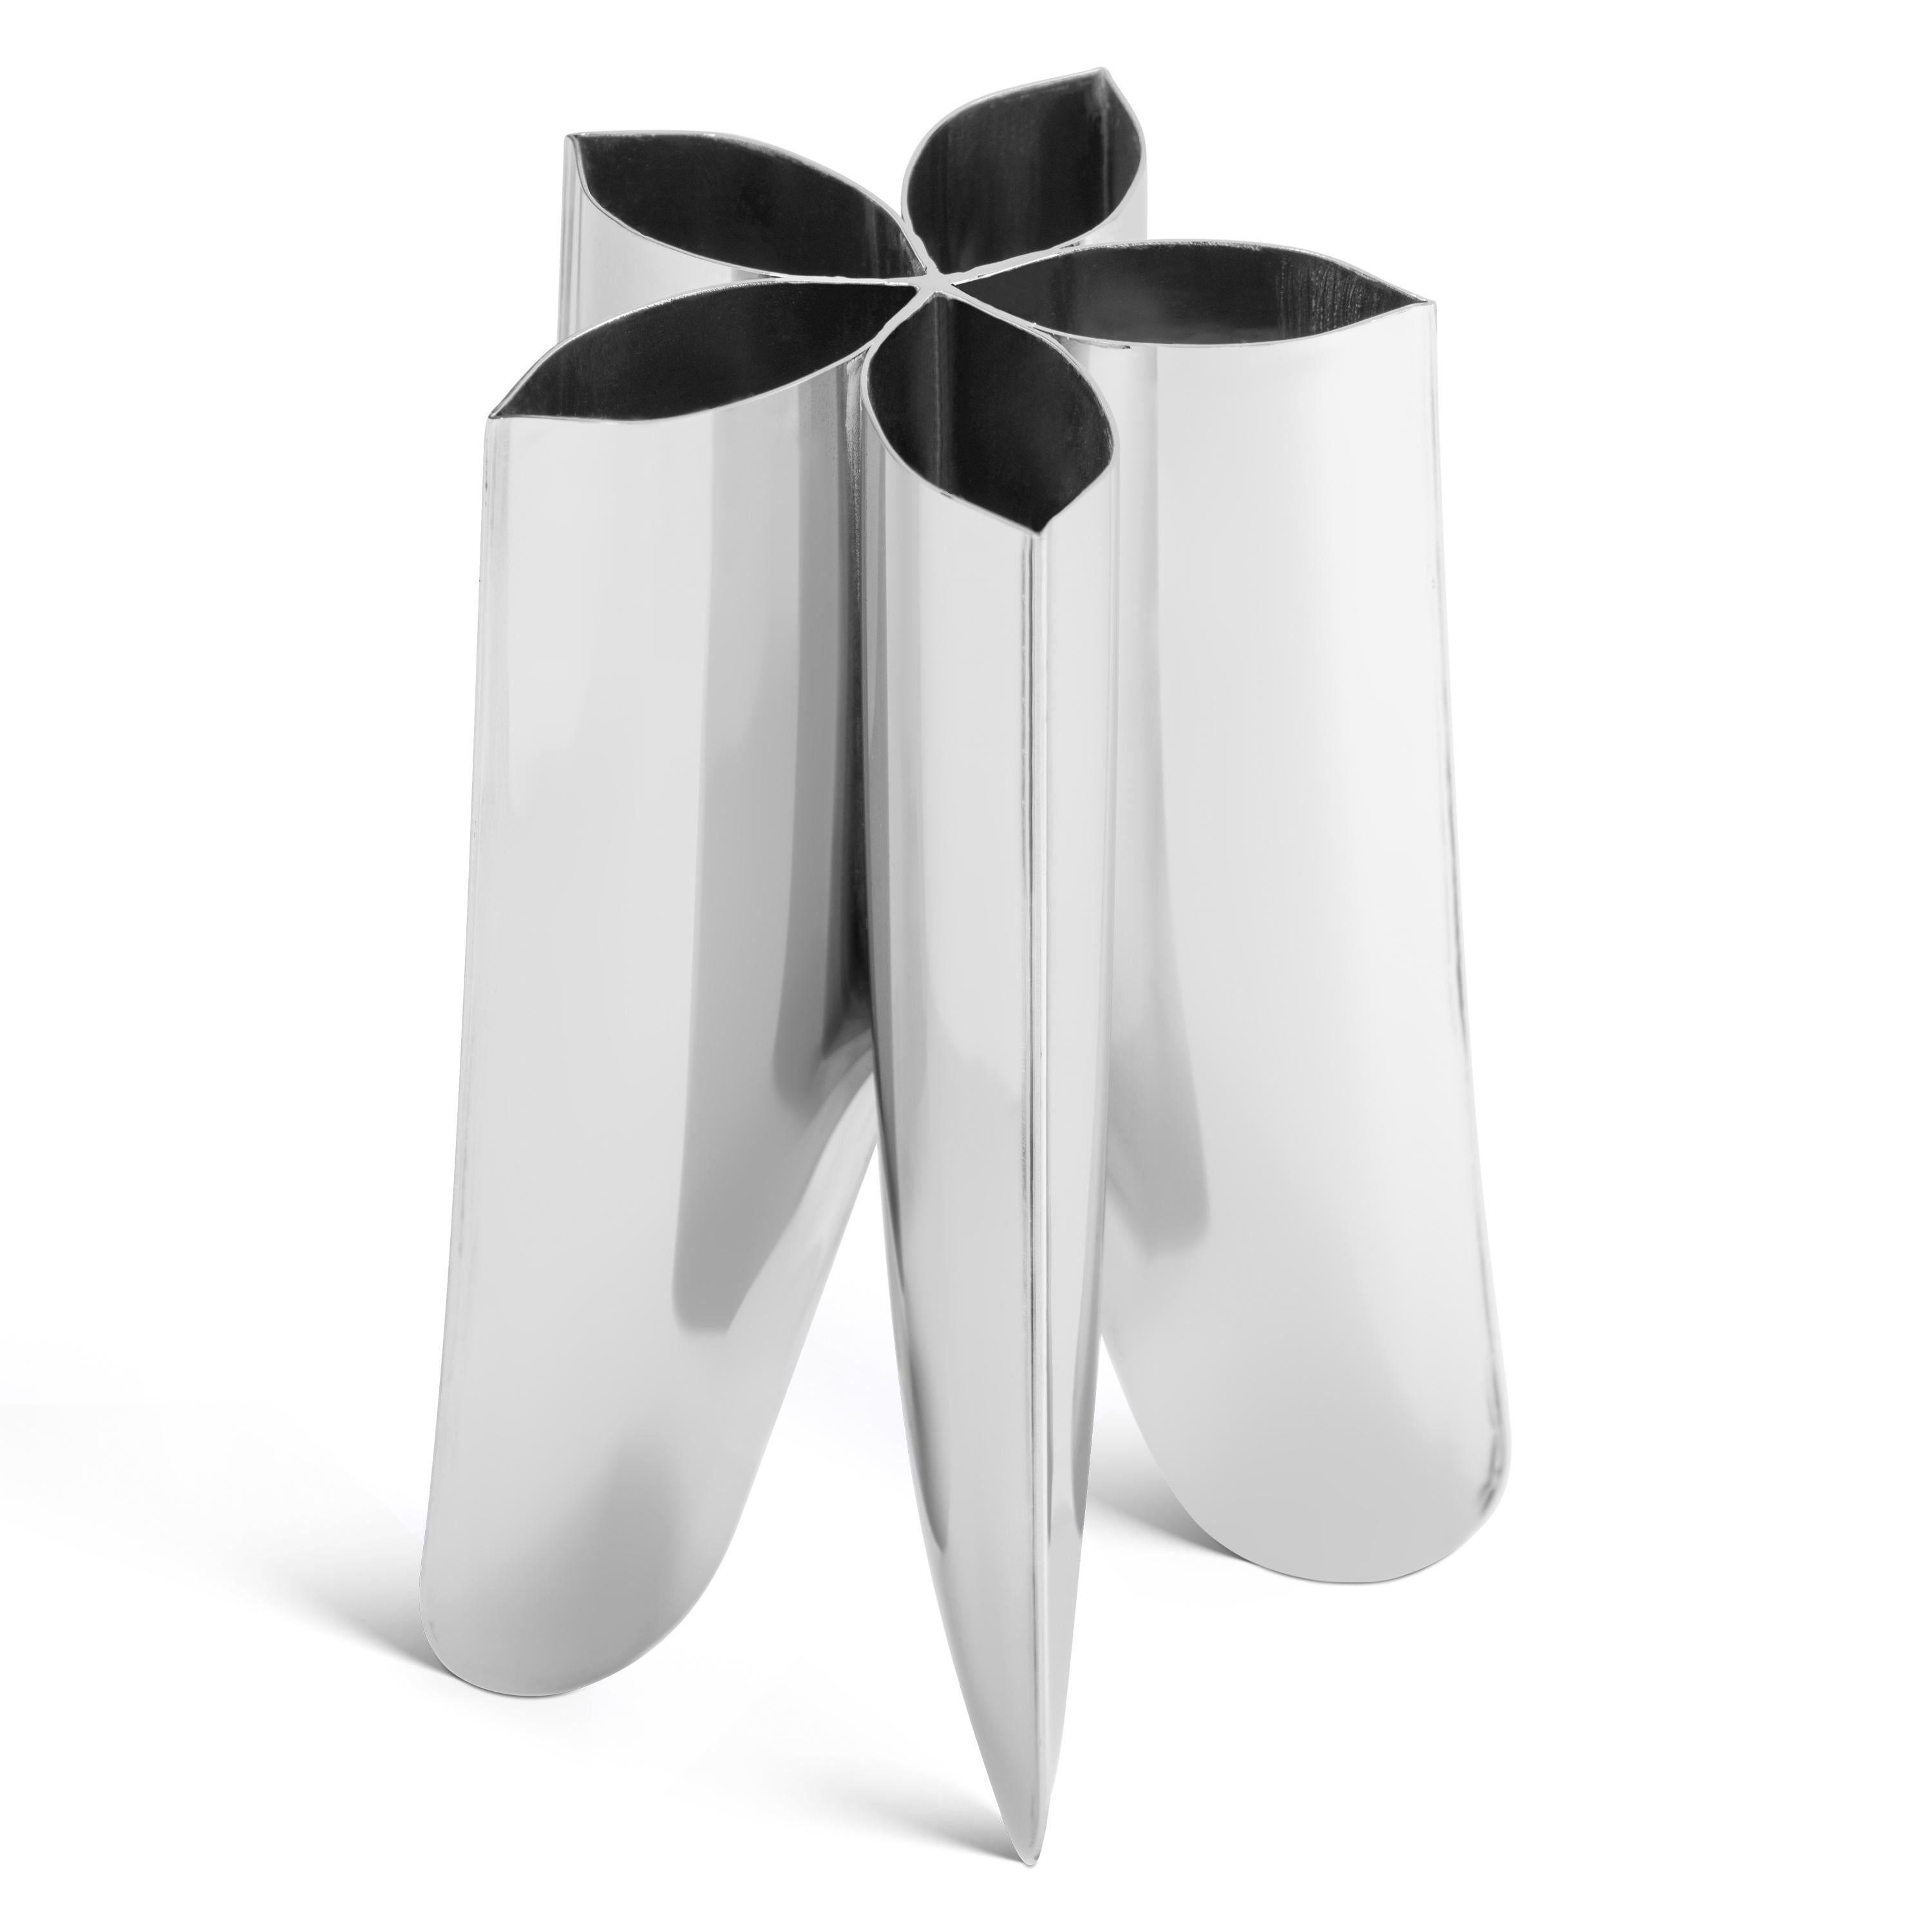 Polish Set of 3 Contemporary Vases 'Rotation' by Zieta, Stainless Steel For Sale